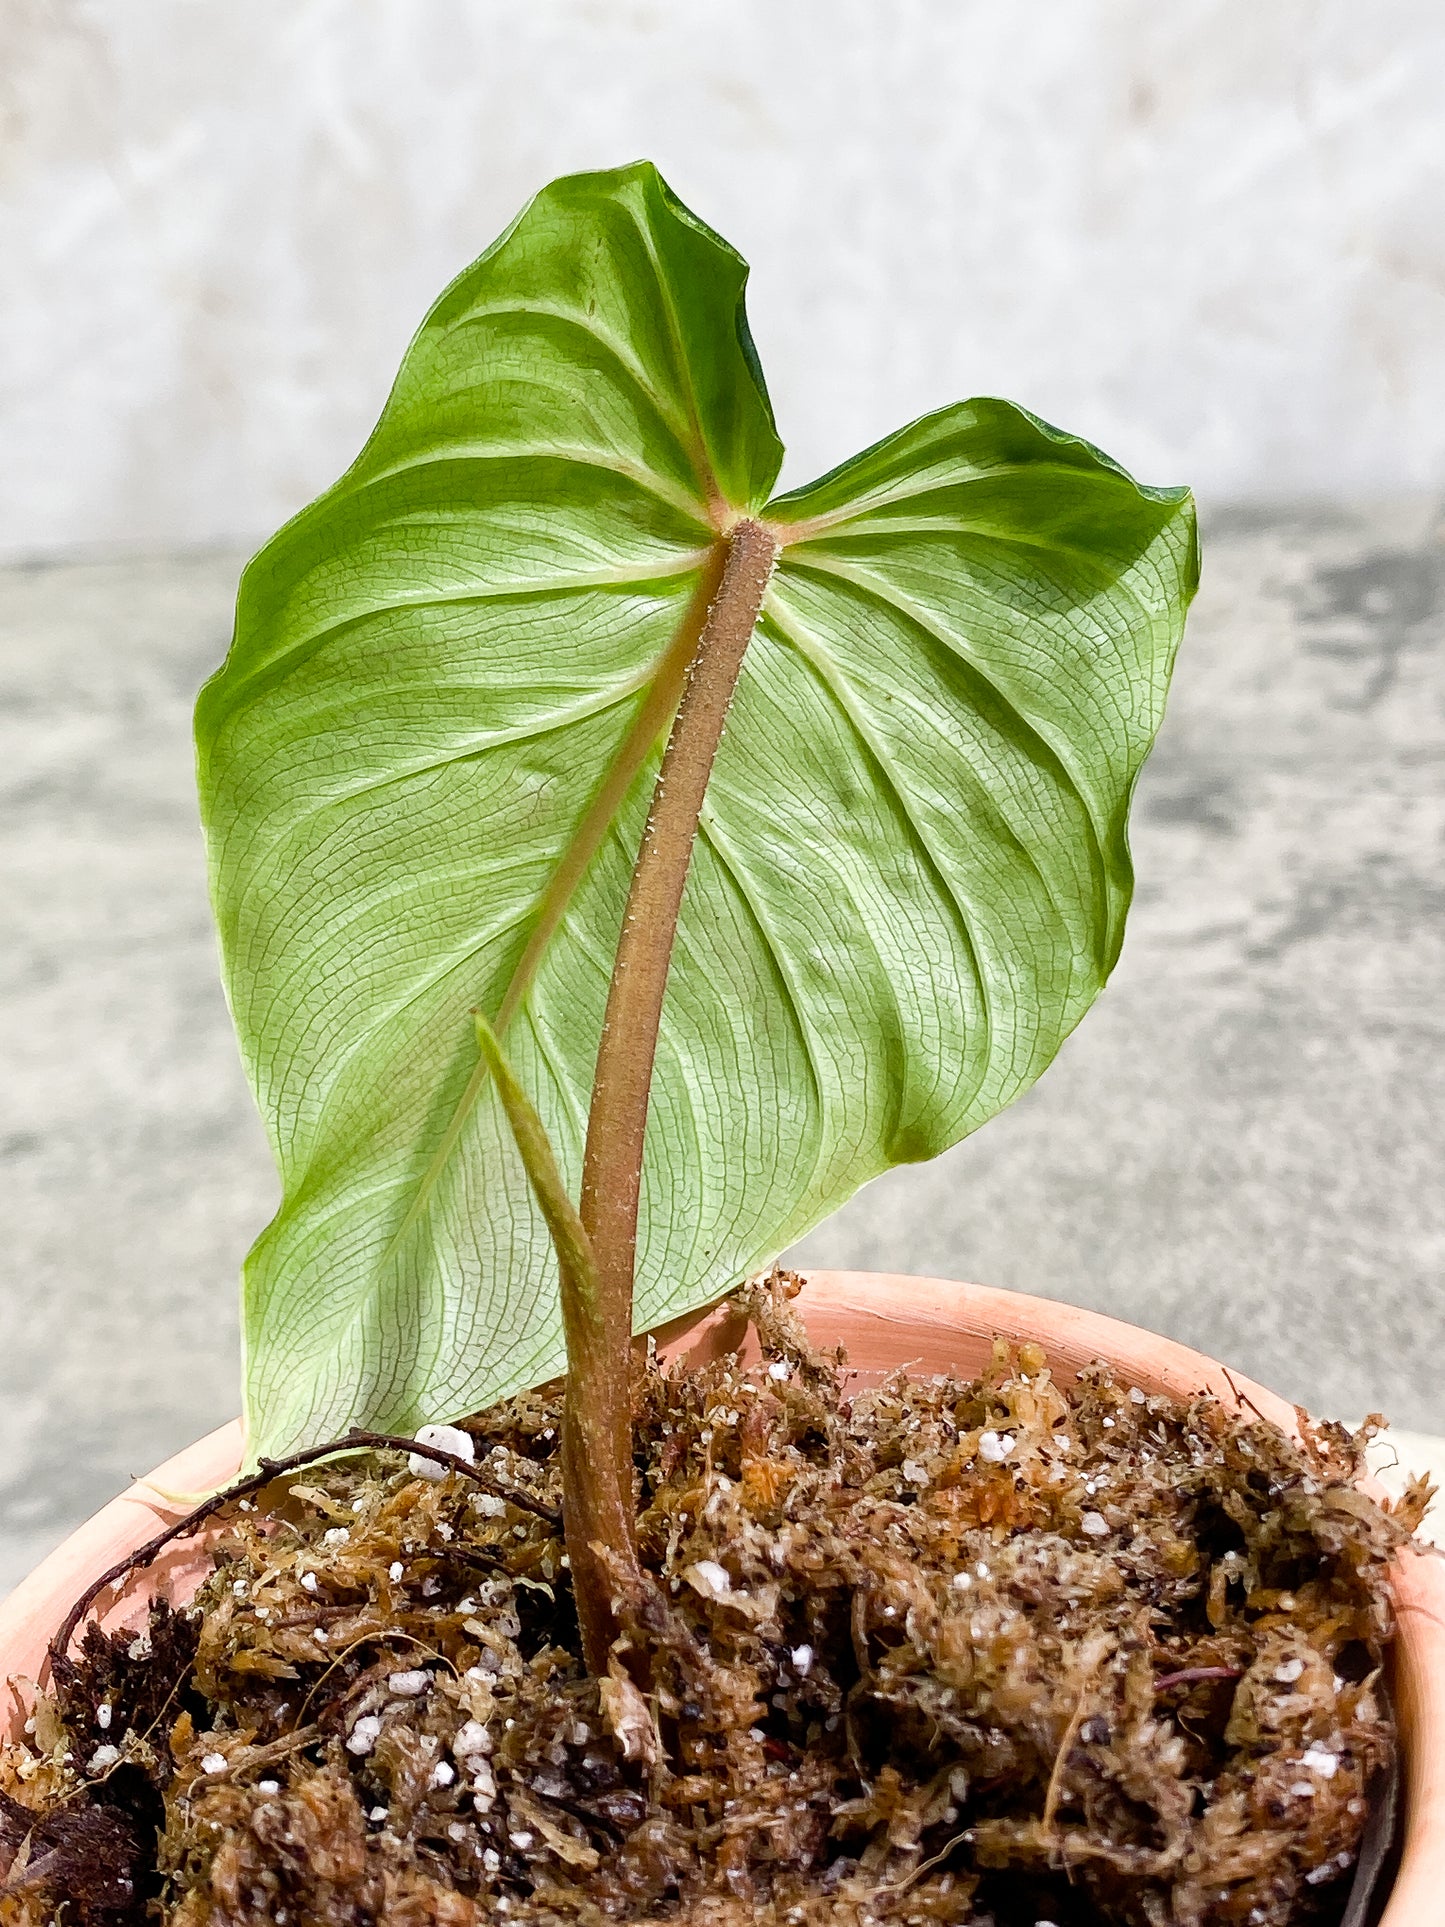 philodendron Verrucosum San Miguel cutting 1 leaf and 1 sprout Slightly Rooted